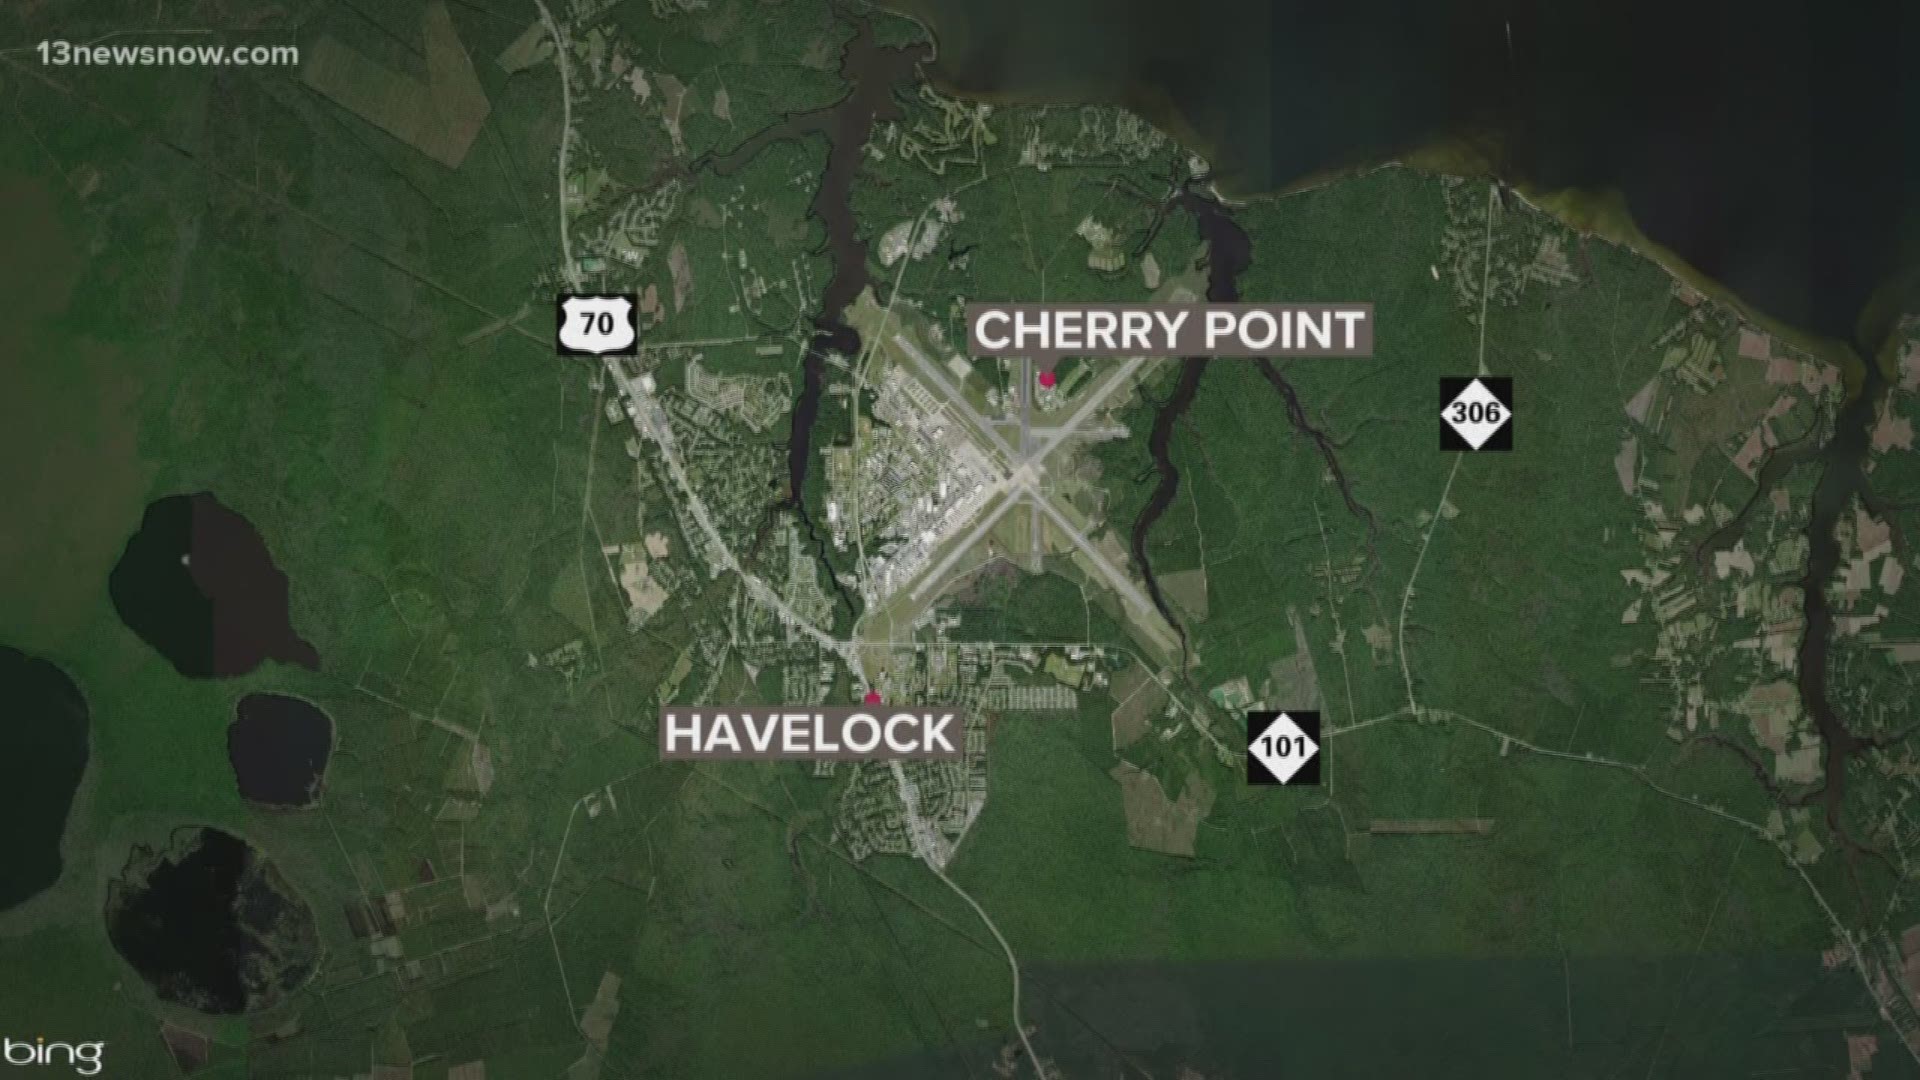 The 2nd Marine Aircraft Wing at Marine Corps Air Station Cherry Point said the AV-8B Harrier crashed Monday night near Havelock.